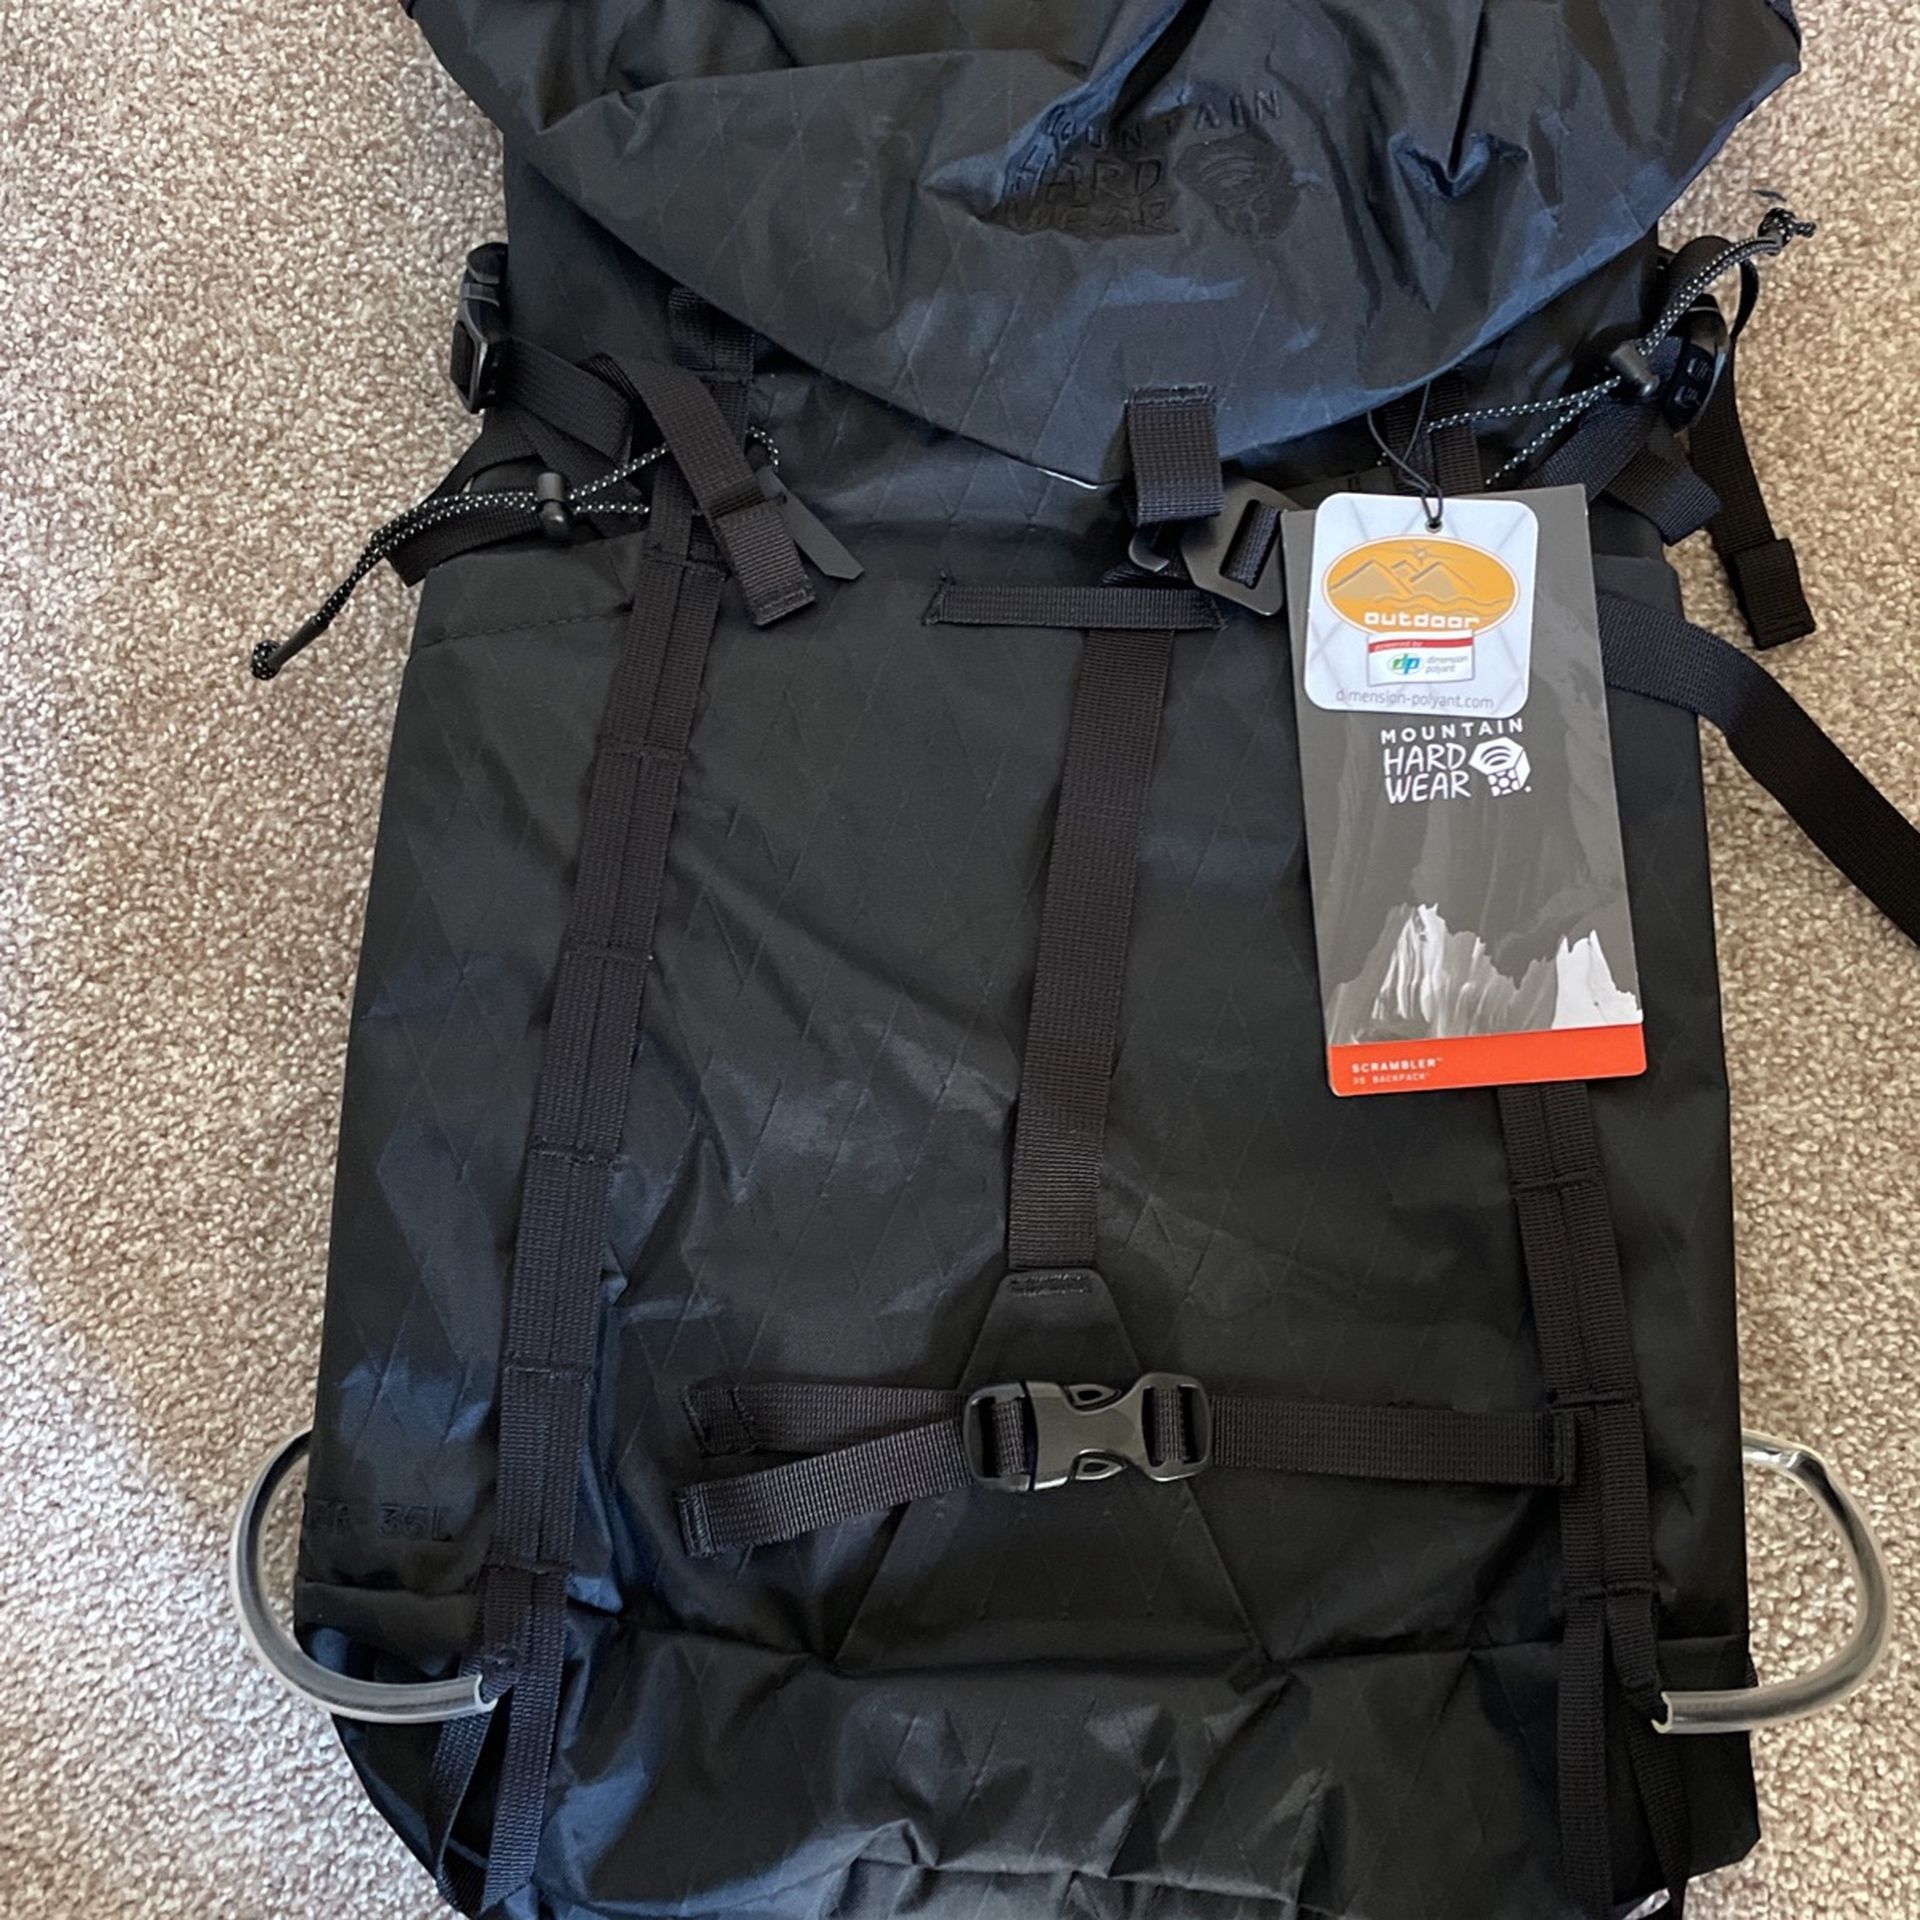 Mountain Hard Wear 35 Backpack With Tags